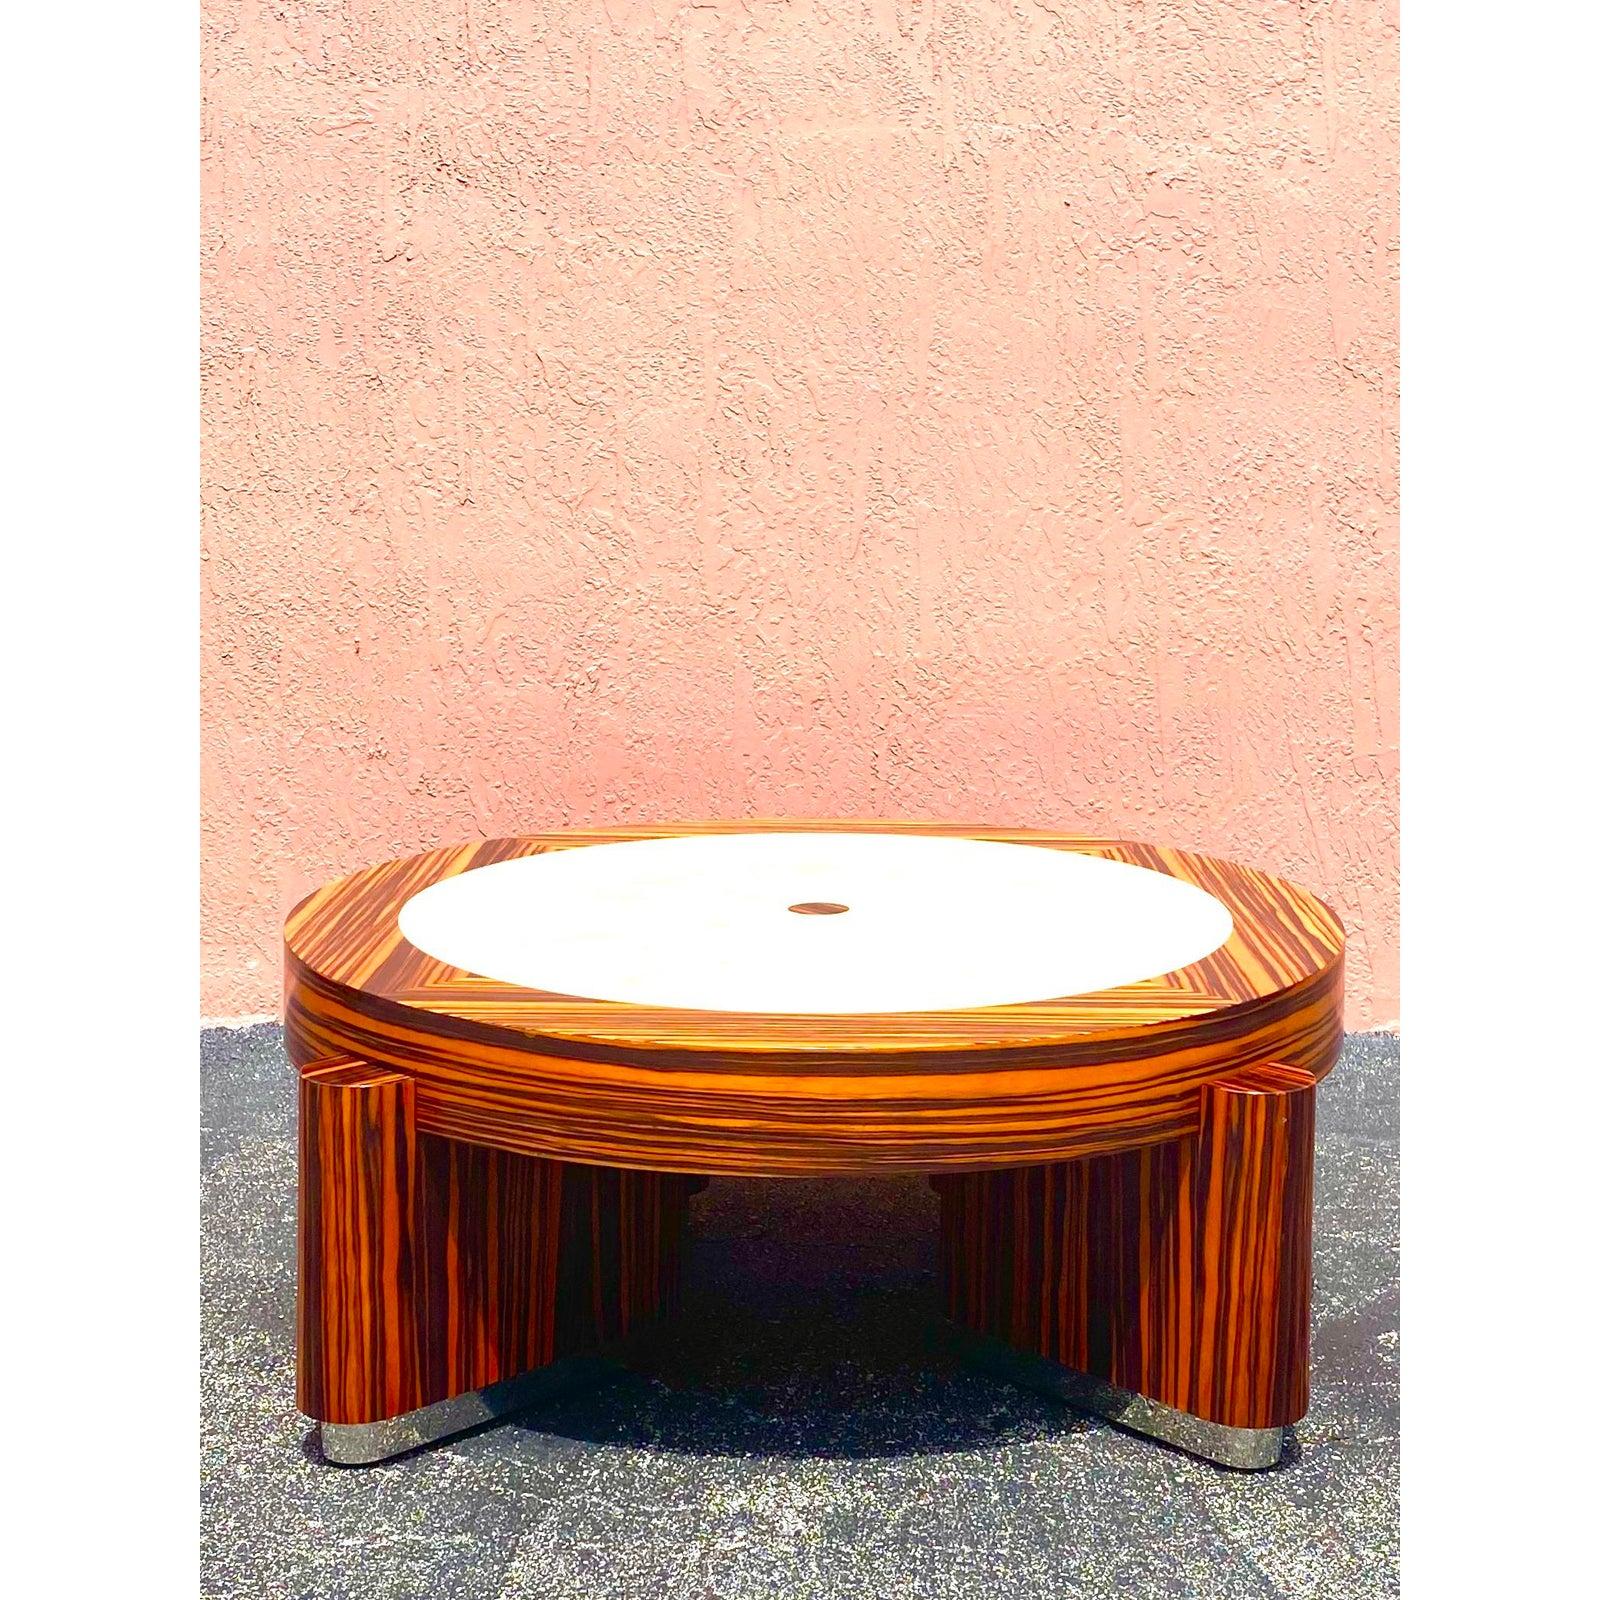 North American Contemporary Zebra Wood and Shagreen Coffee Table